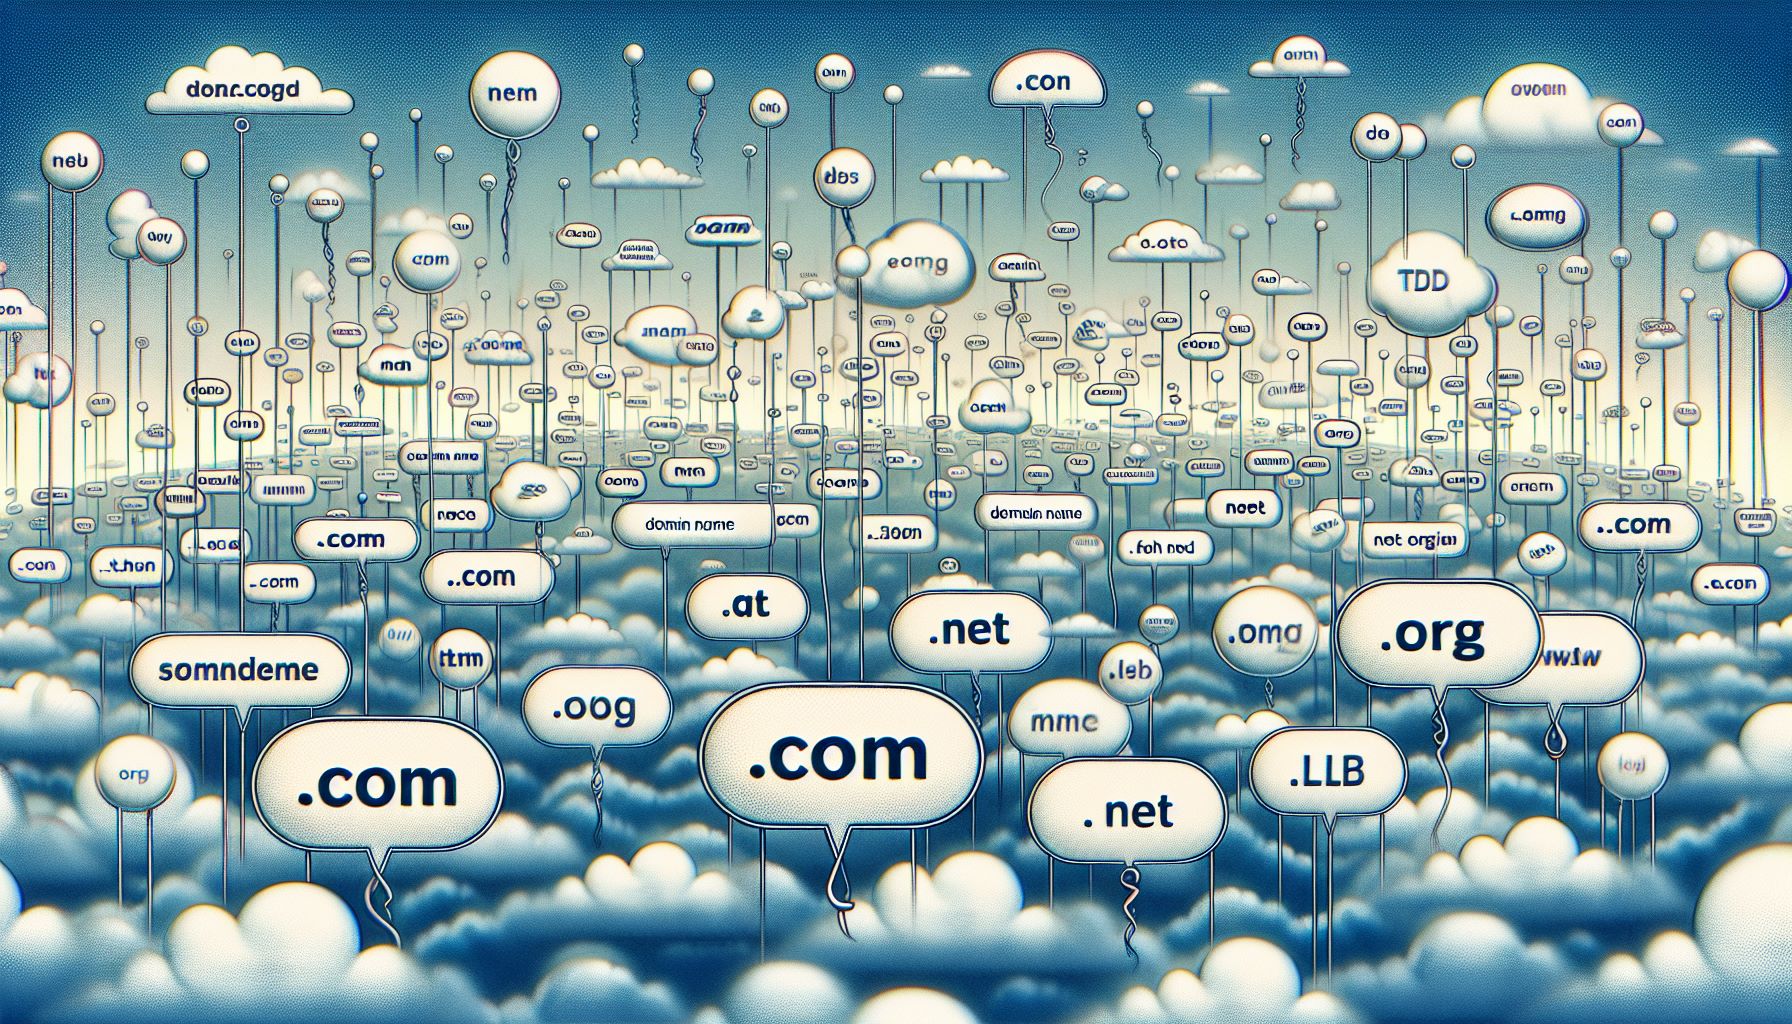 Illustration of various domain name options